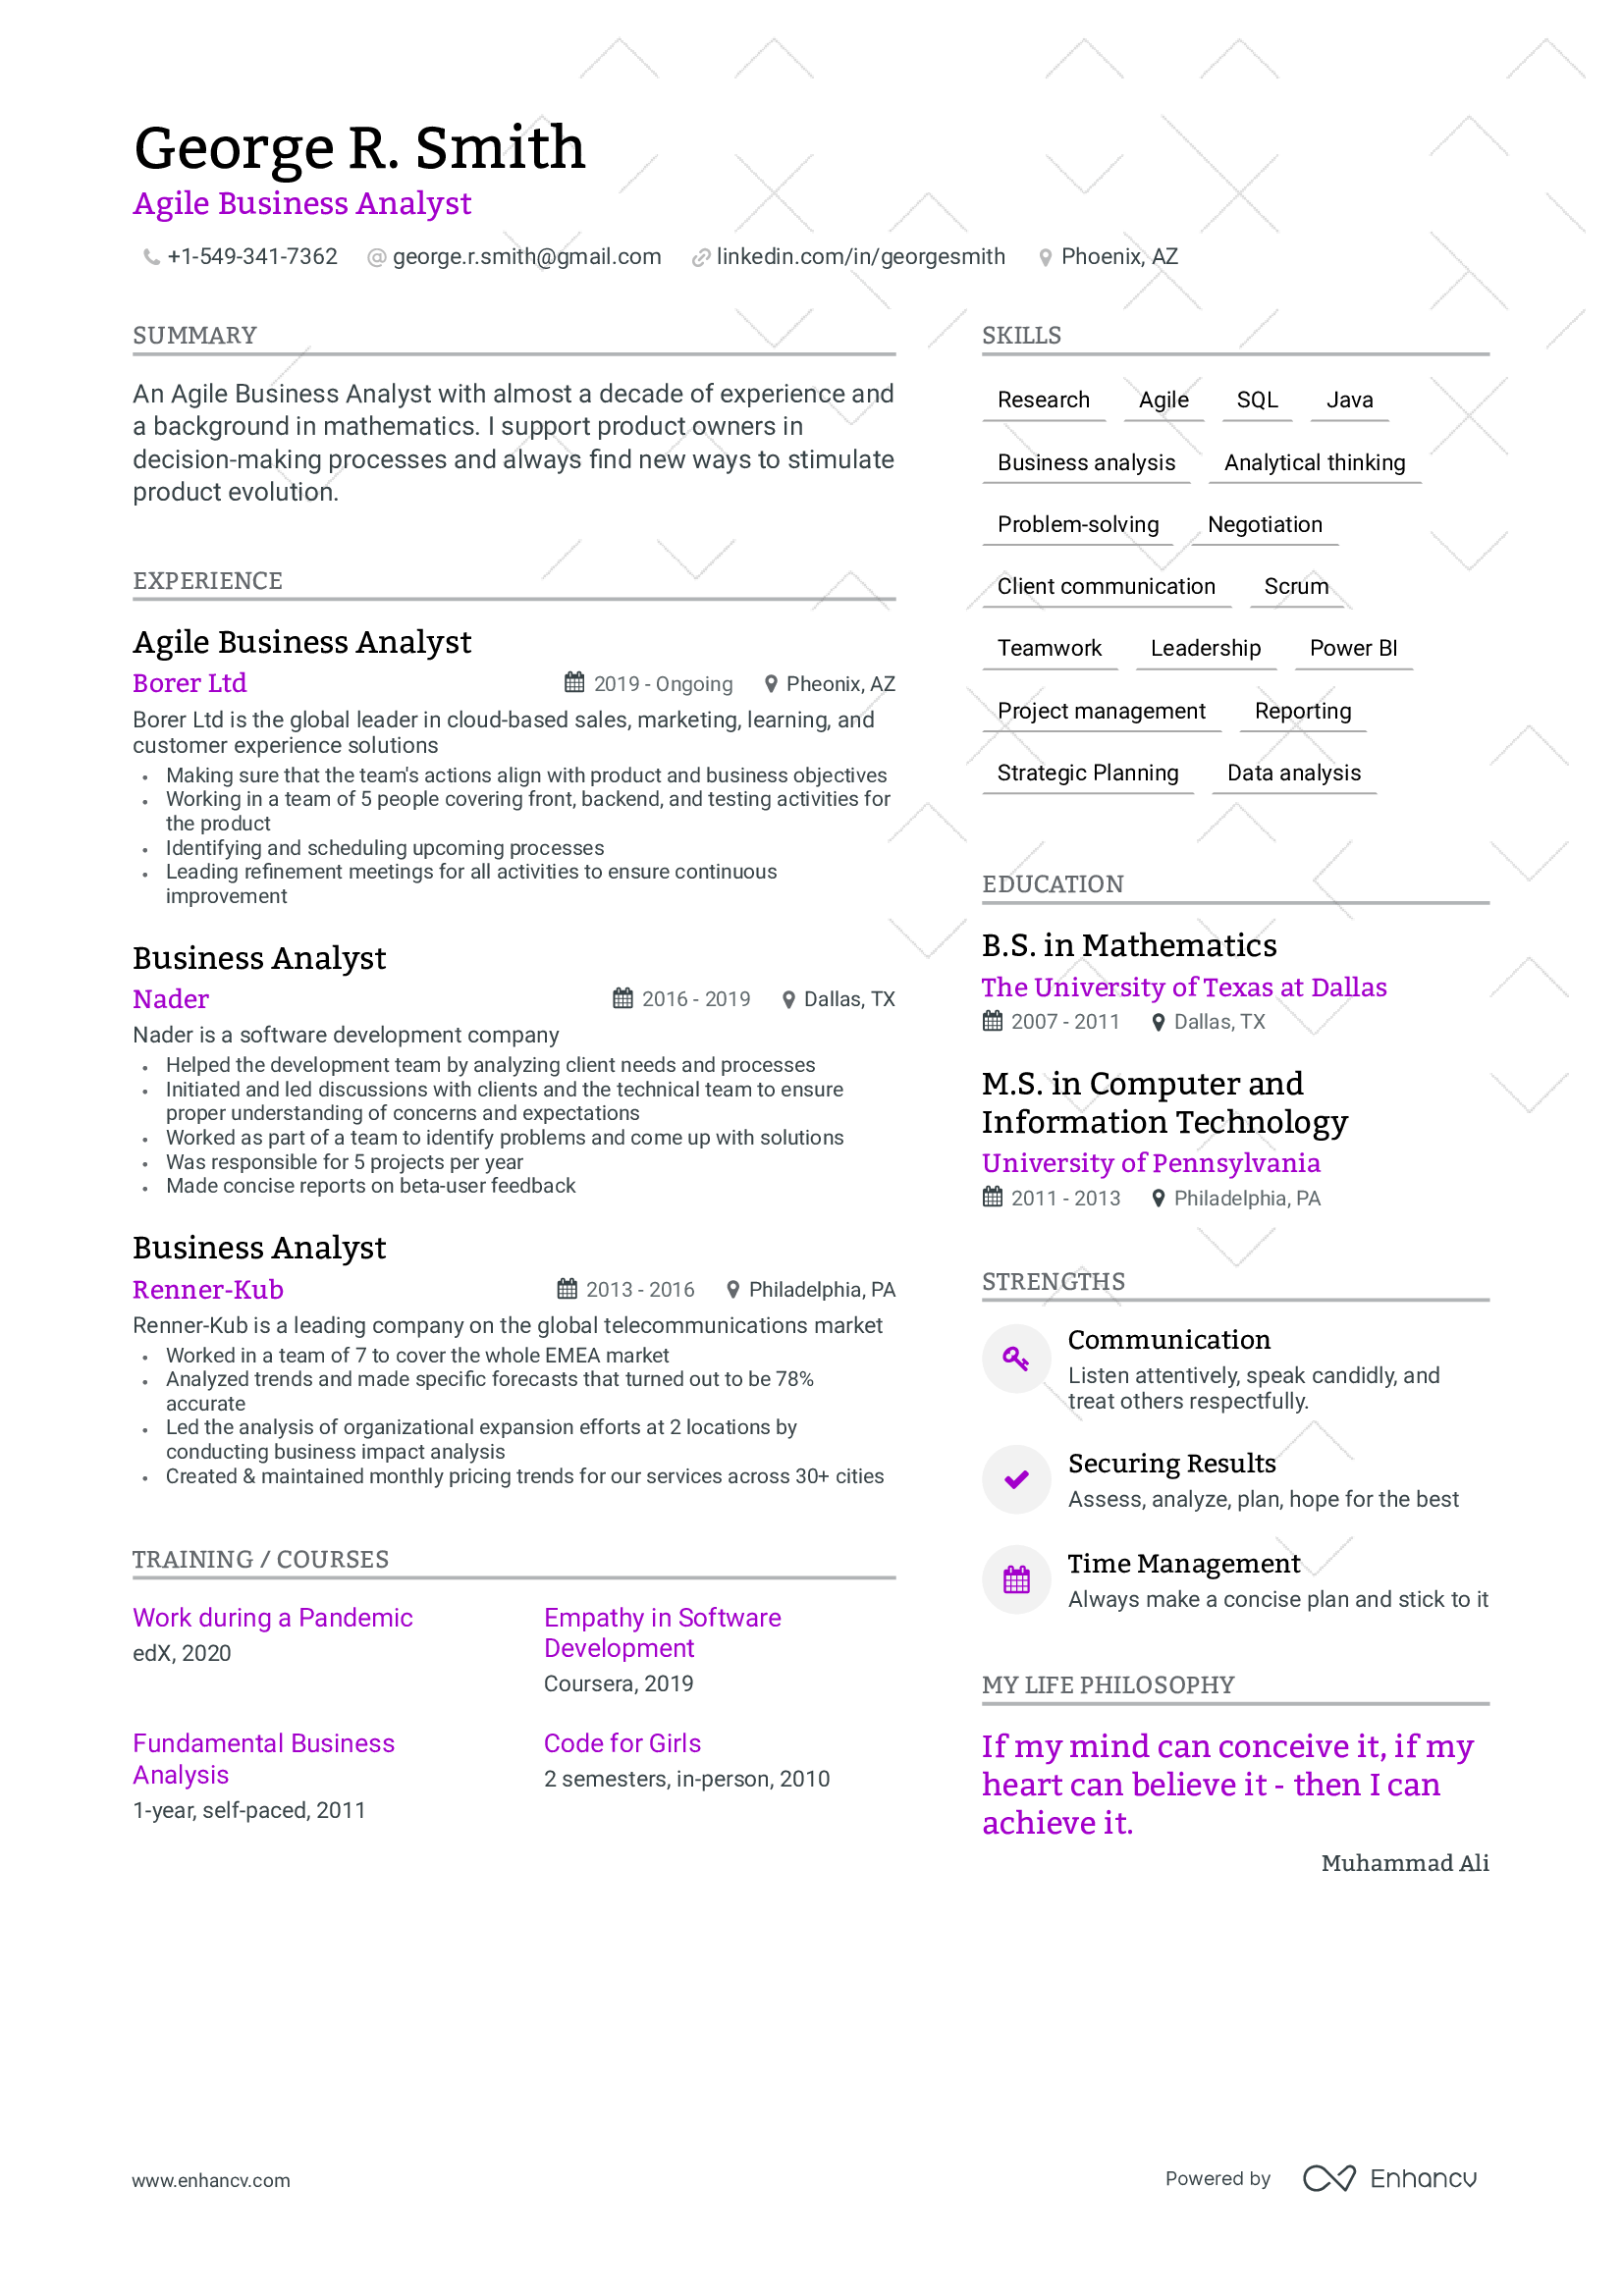 Agile Business Analyst resume.png